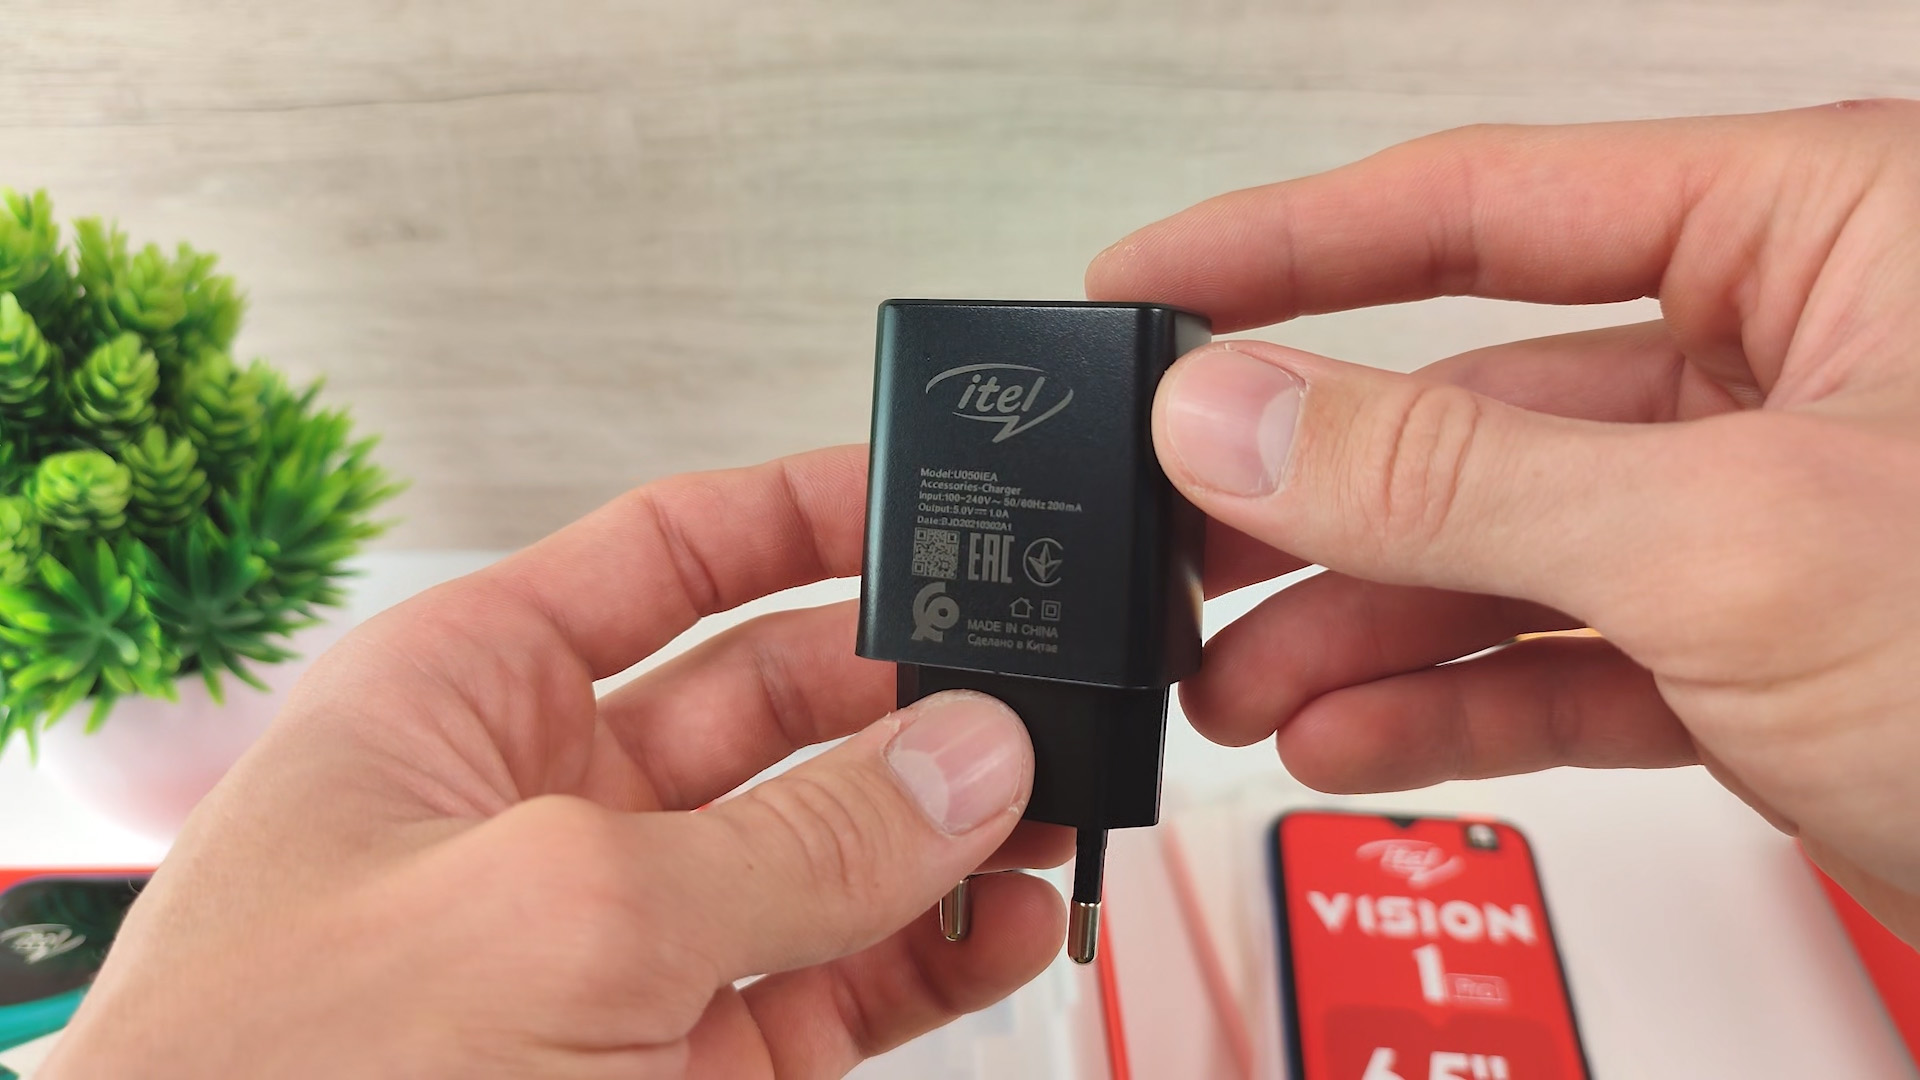 Itel Vision 1 Pro Charger